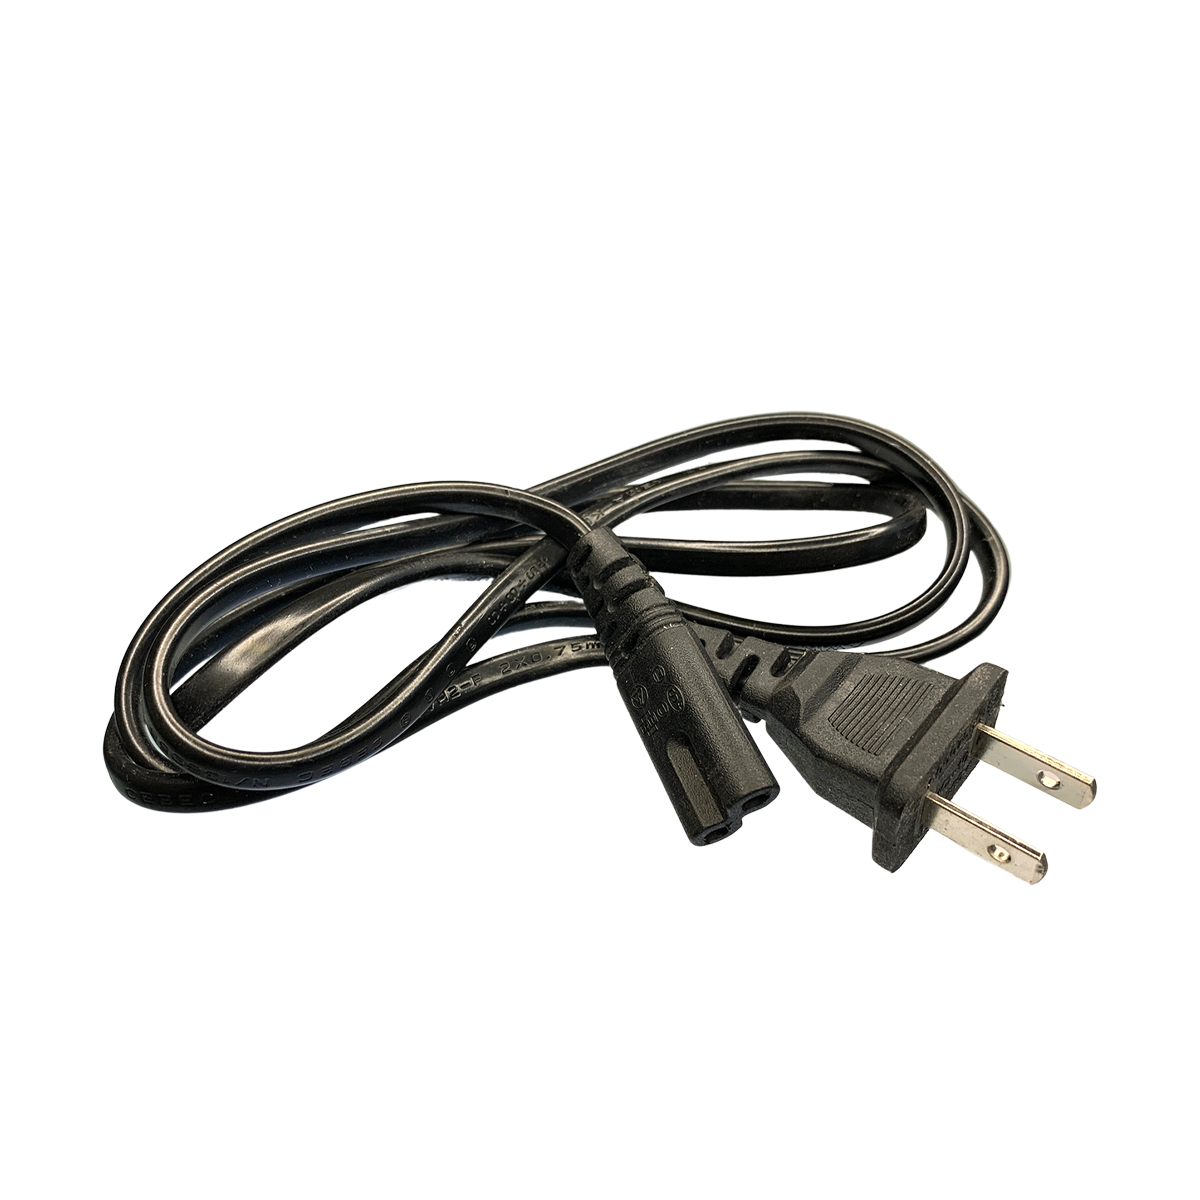 PS5 Power Supply Cord Lead Cable Adapter Wire for Sony PlayStation 5 US